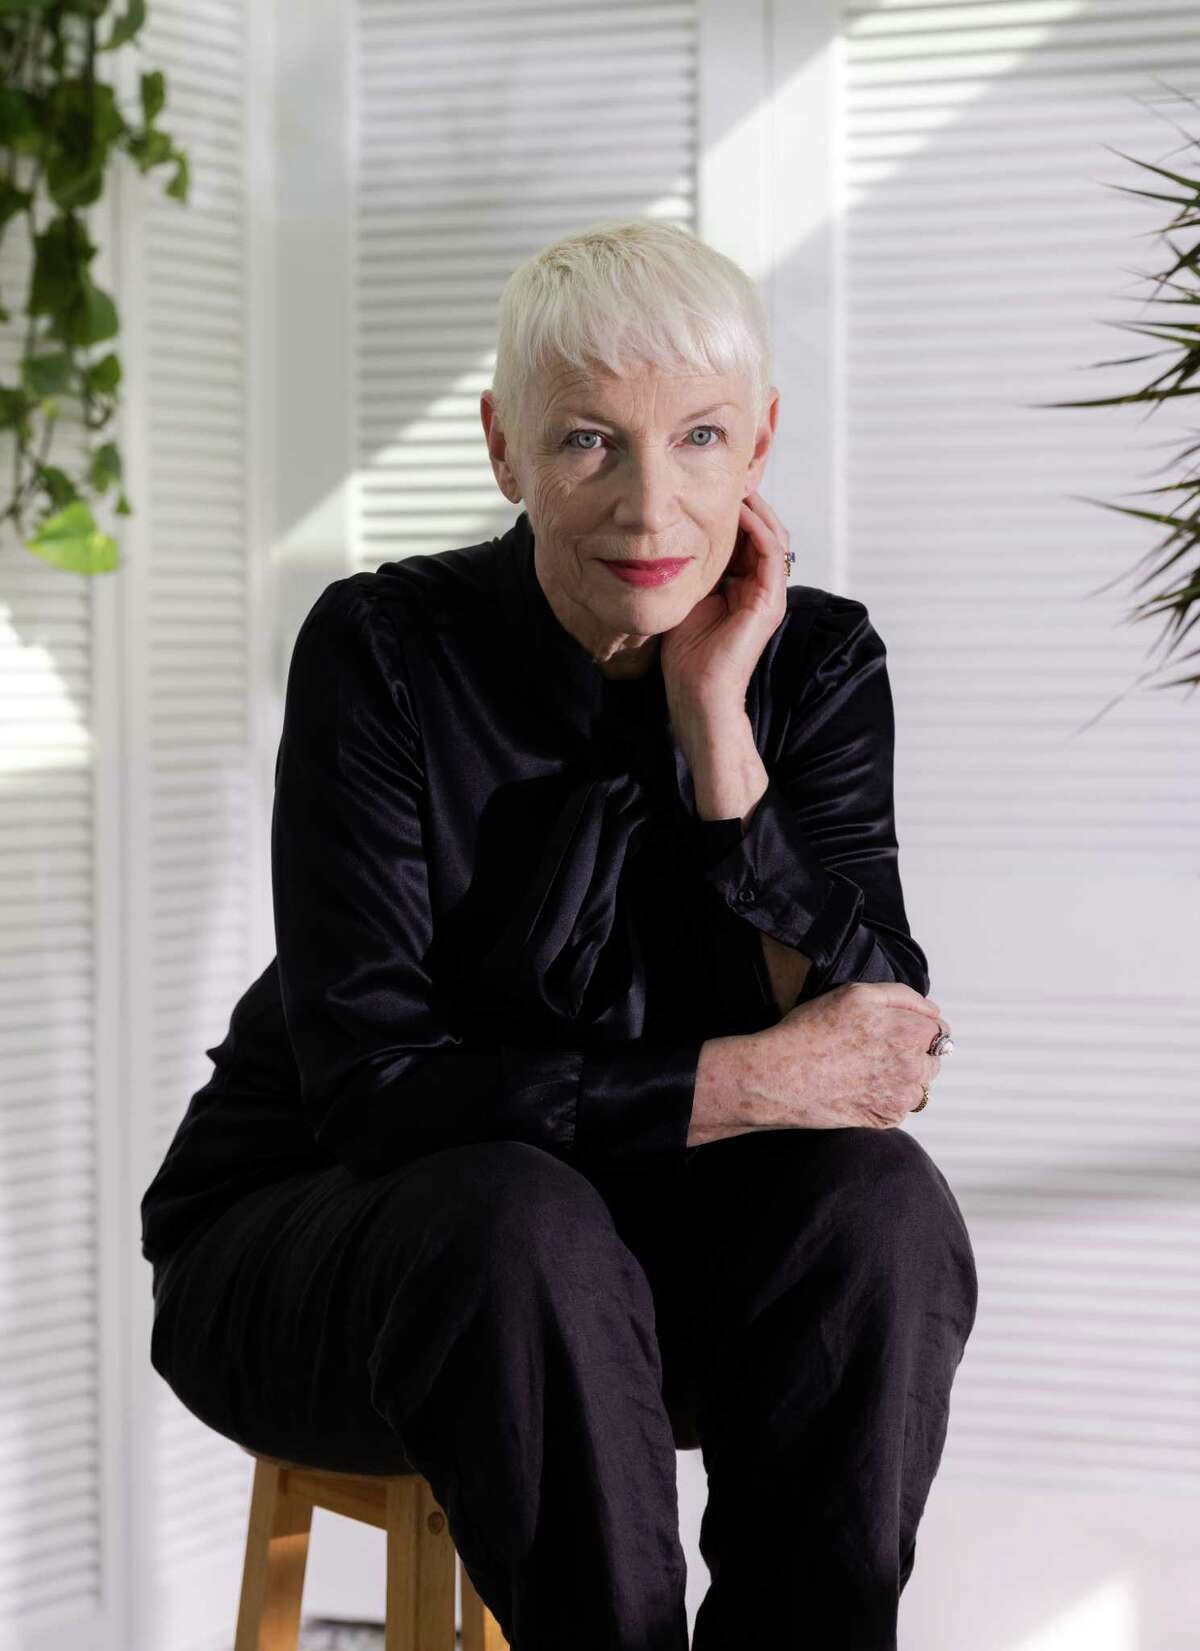 Annie Lennox in her home music studio in Los Angeles.